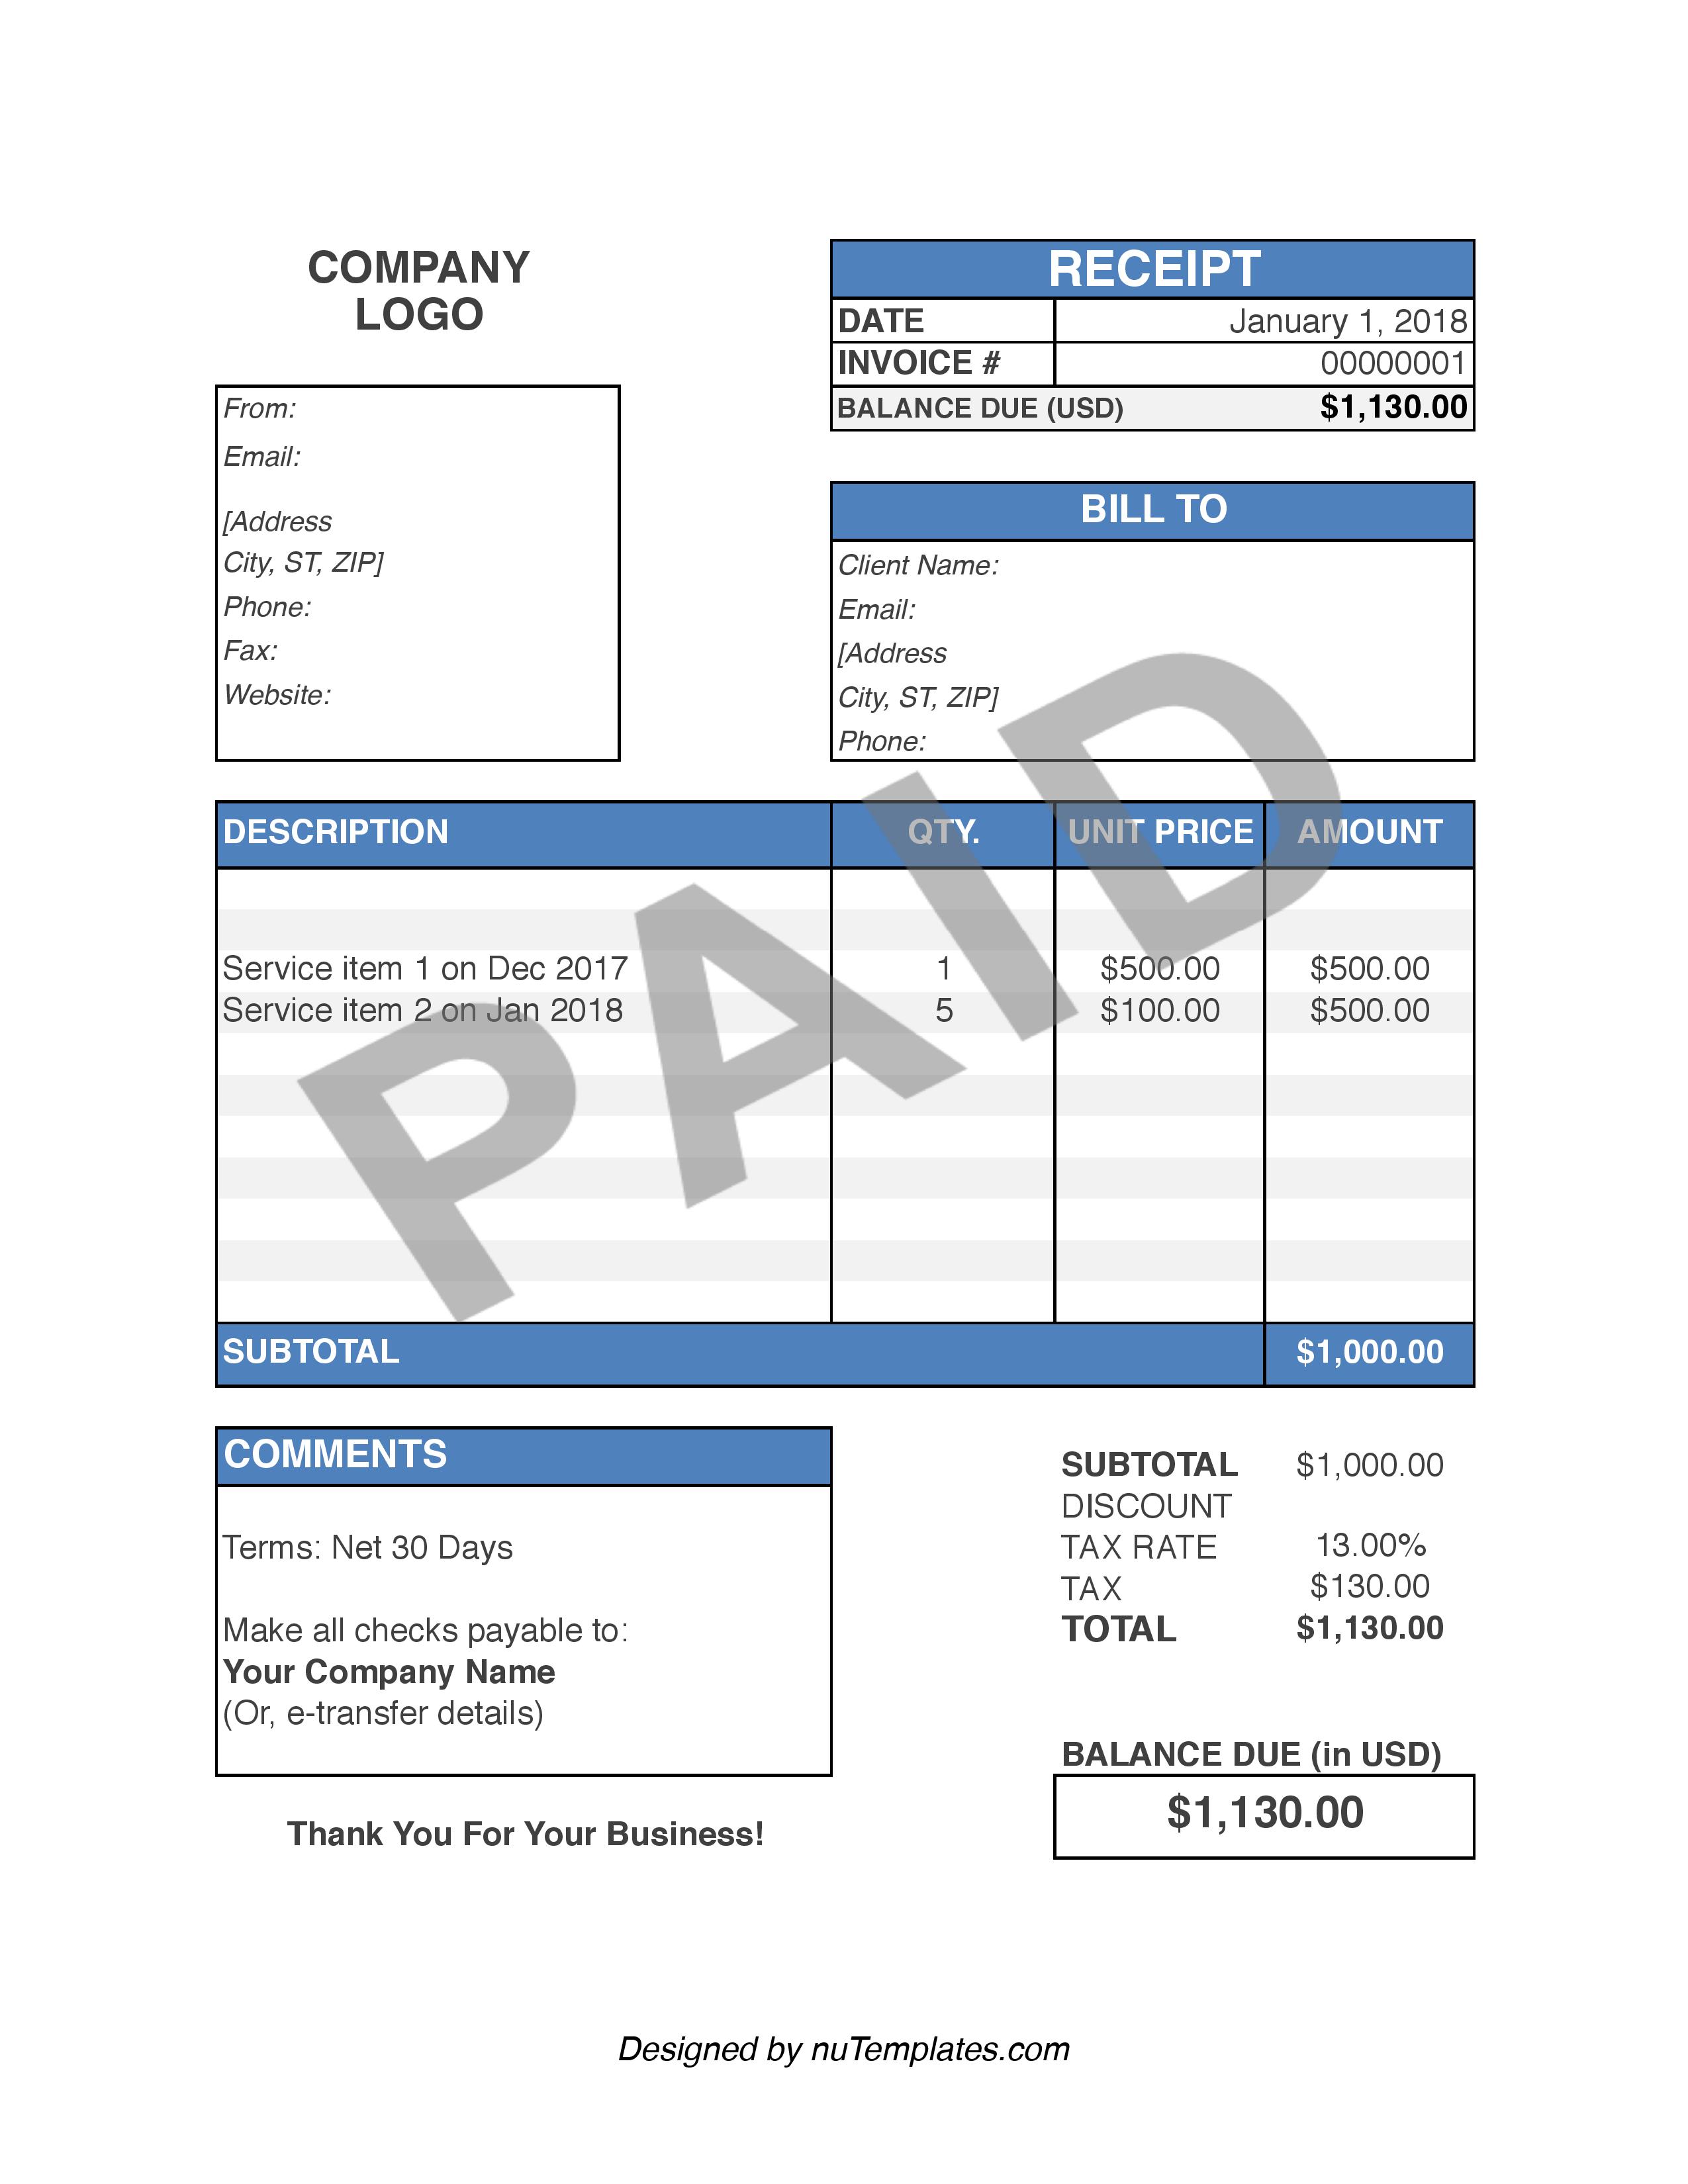 template-receipt-for-sevice-awesome-printable-receipt-templates